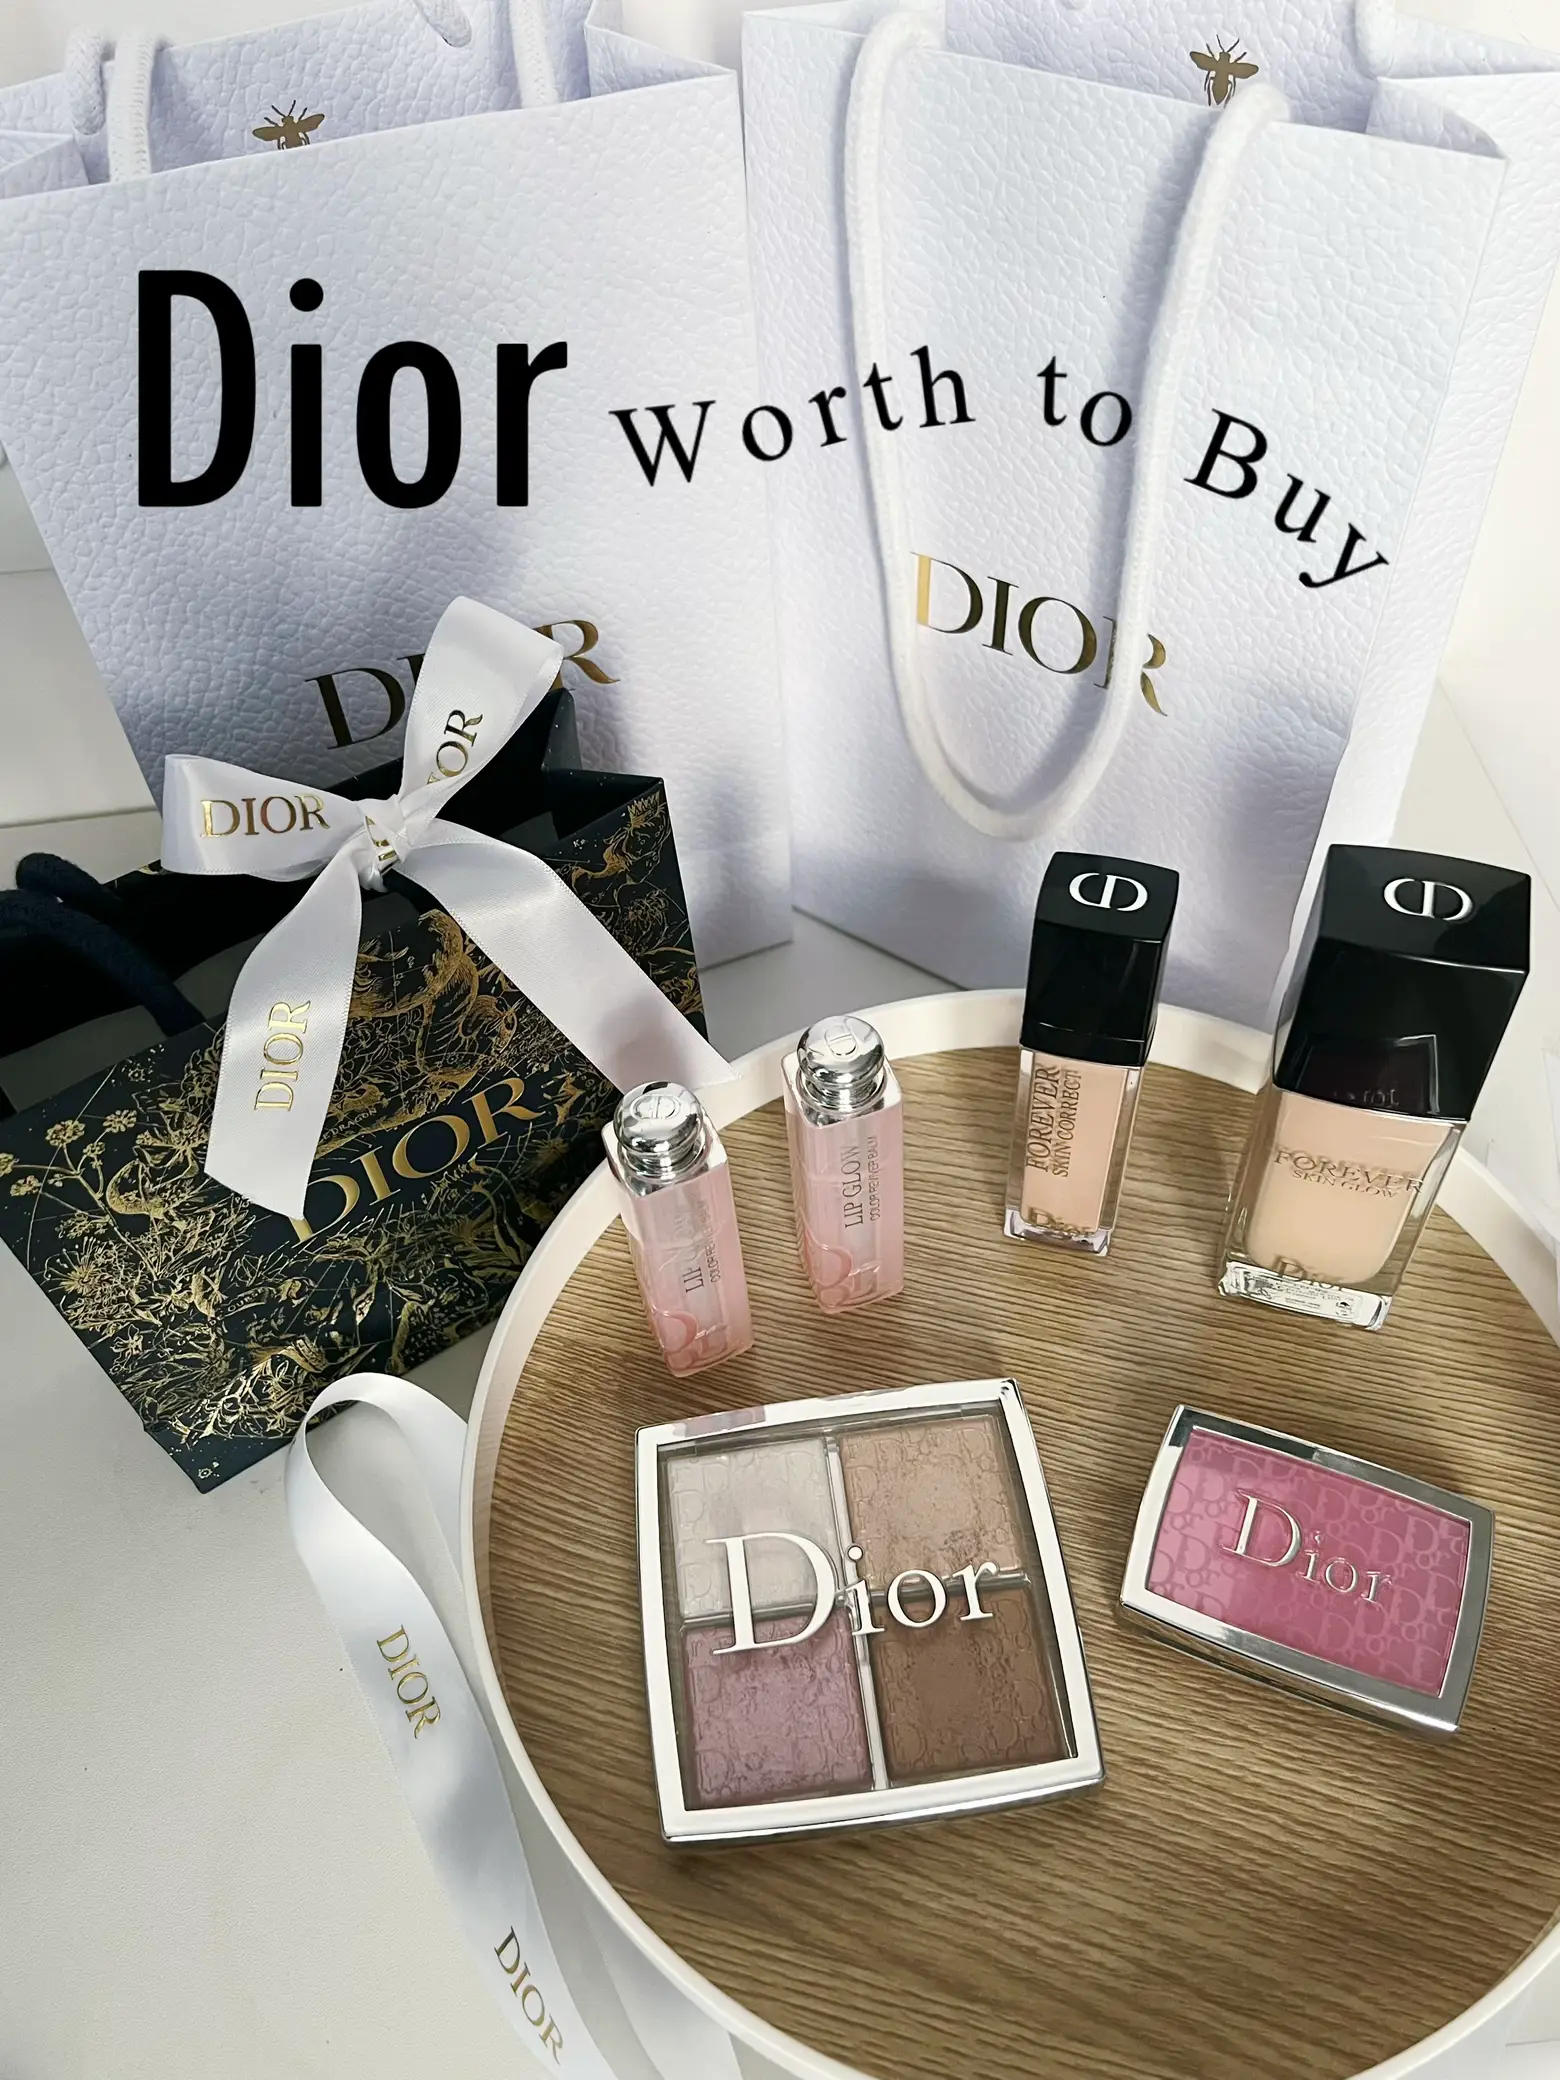 Time to Stock Up for the Week 🛒 Treat Yourself to Your Favorite Luxury  Designer Beauty Brands like @diorbeauty @diptyque @charlottetilbury …